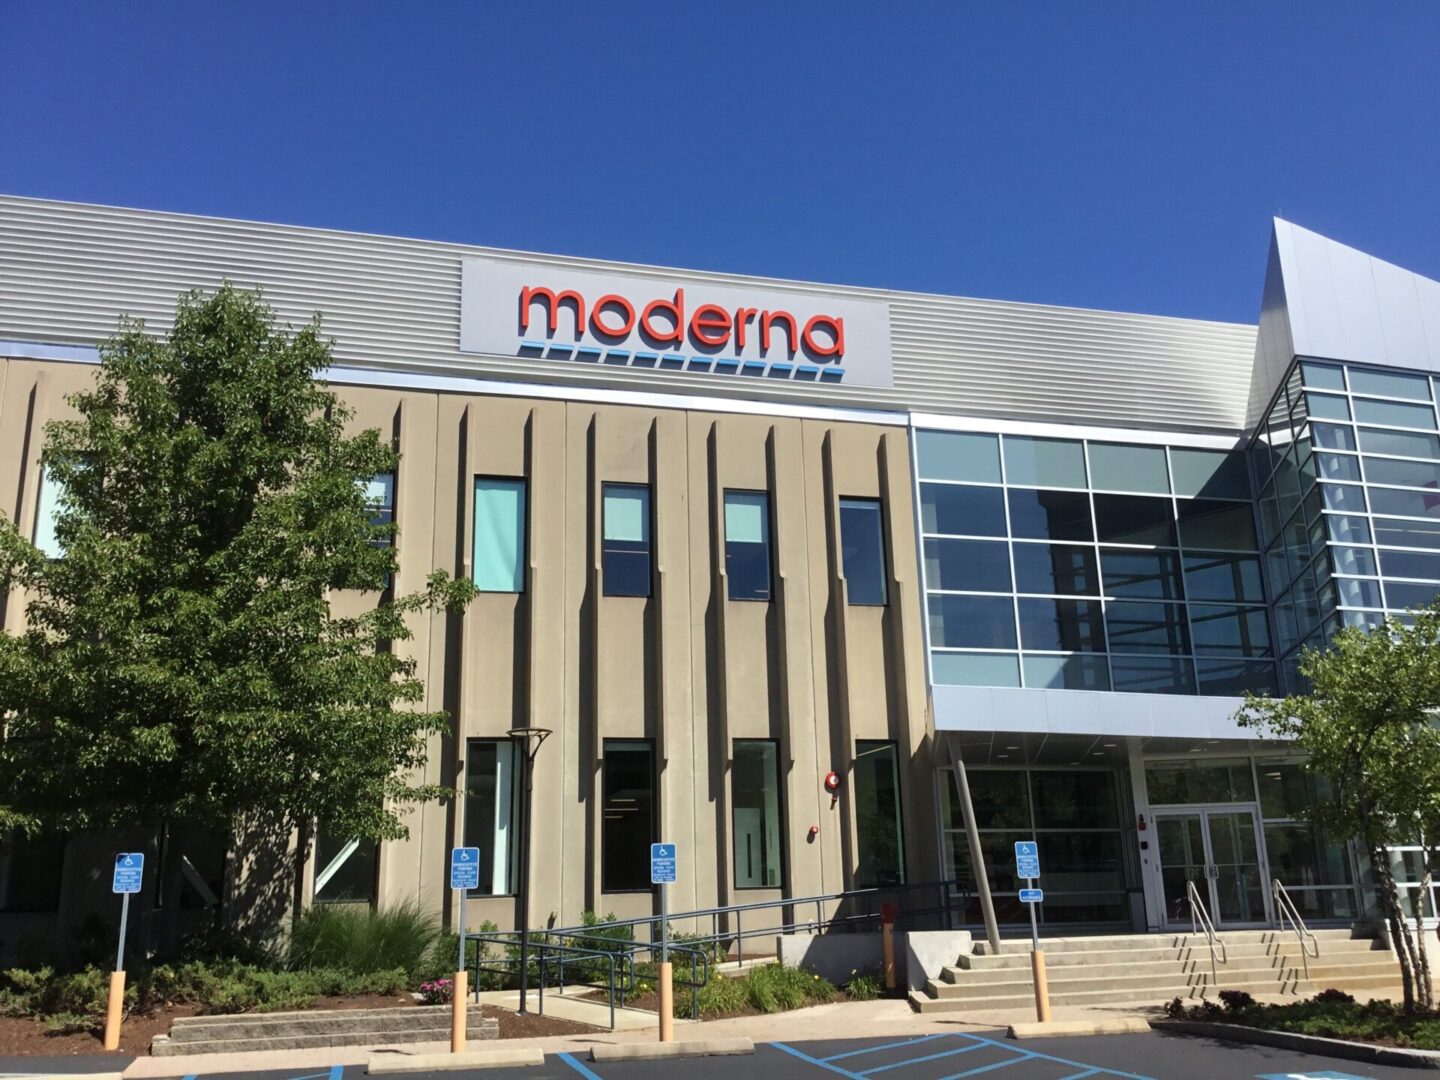 An entry view of the Moderna building